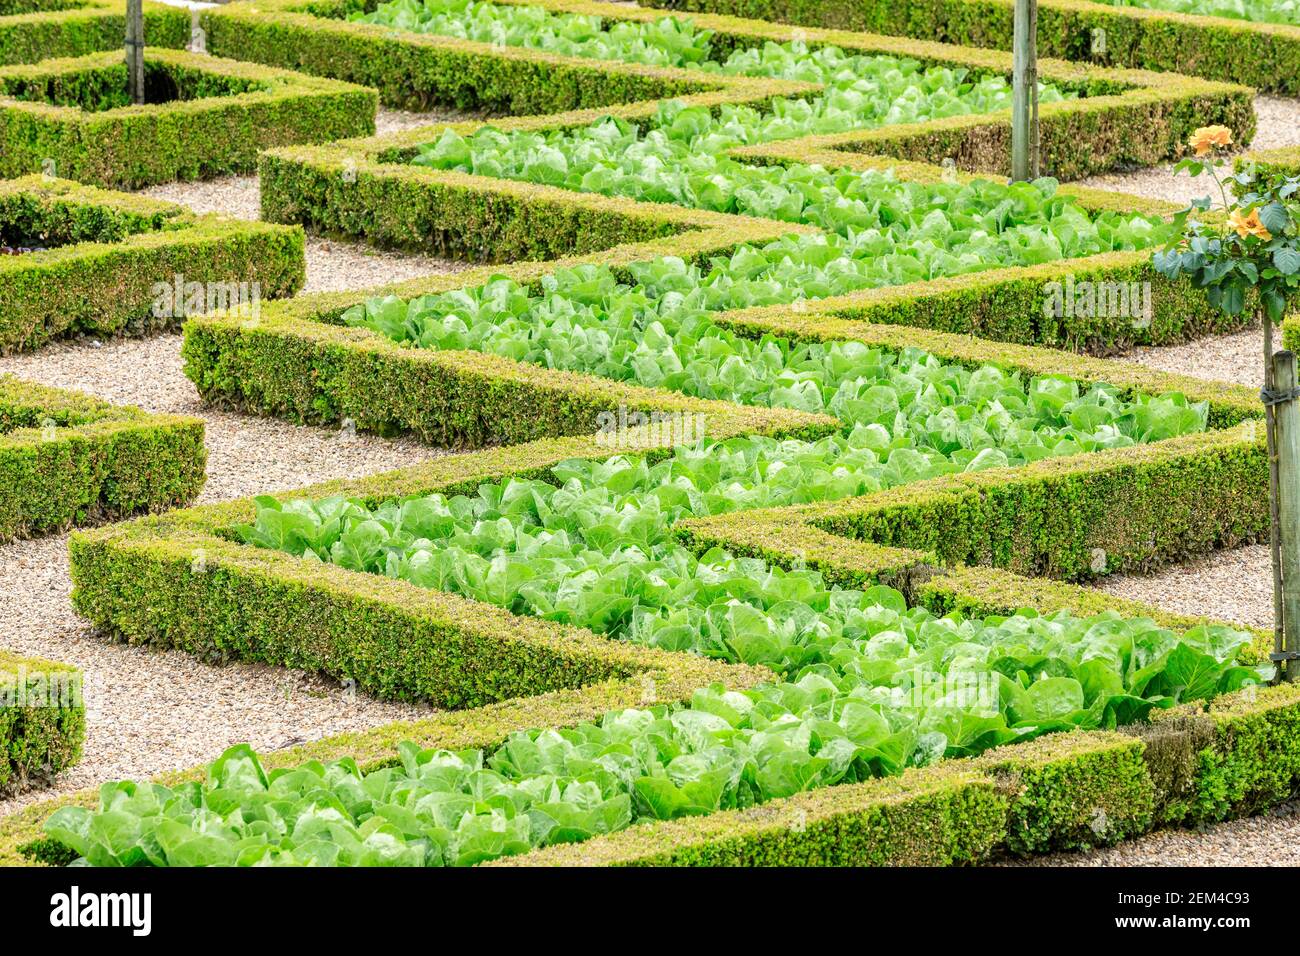 France, Indre et Loire, Loire valley listed as World Heritage by UNESCO, the castle and the gardens of Villandry, the Potager, lettuces and box hedges Stock Photo